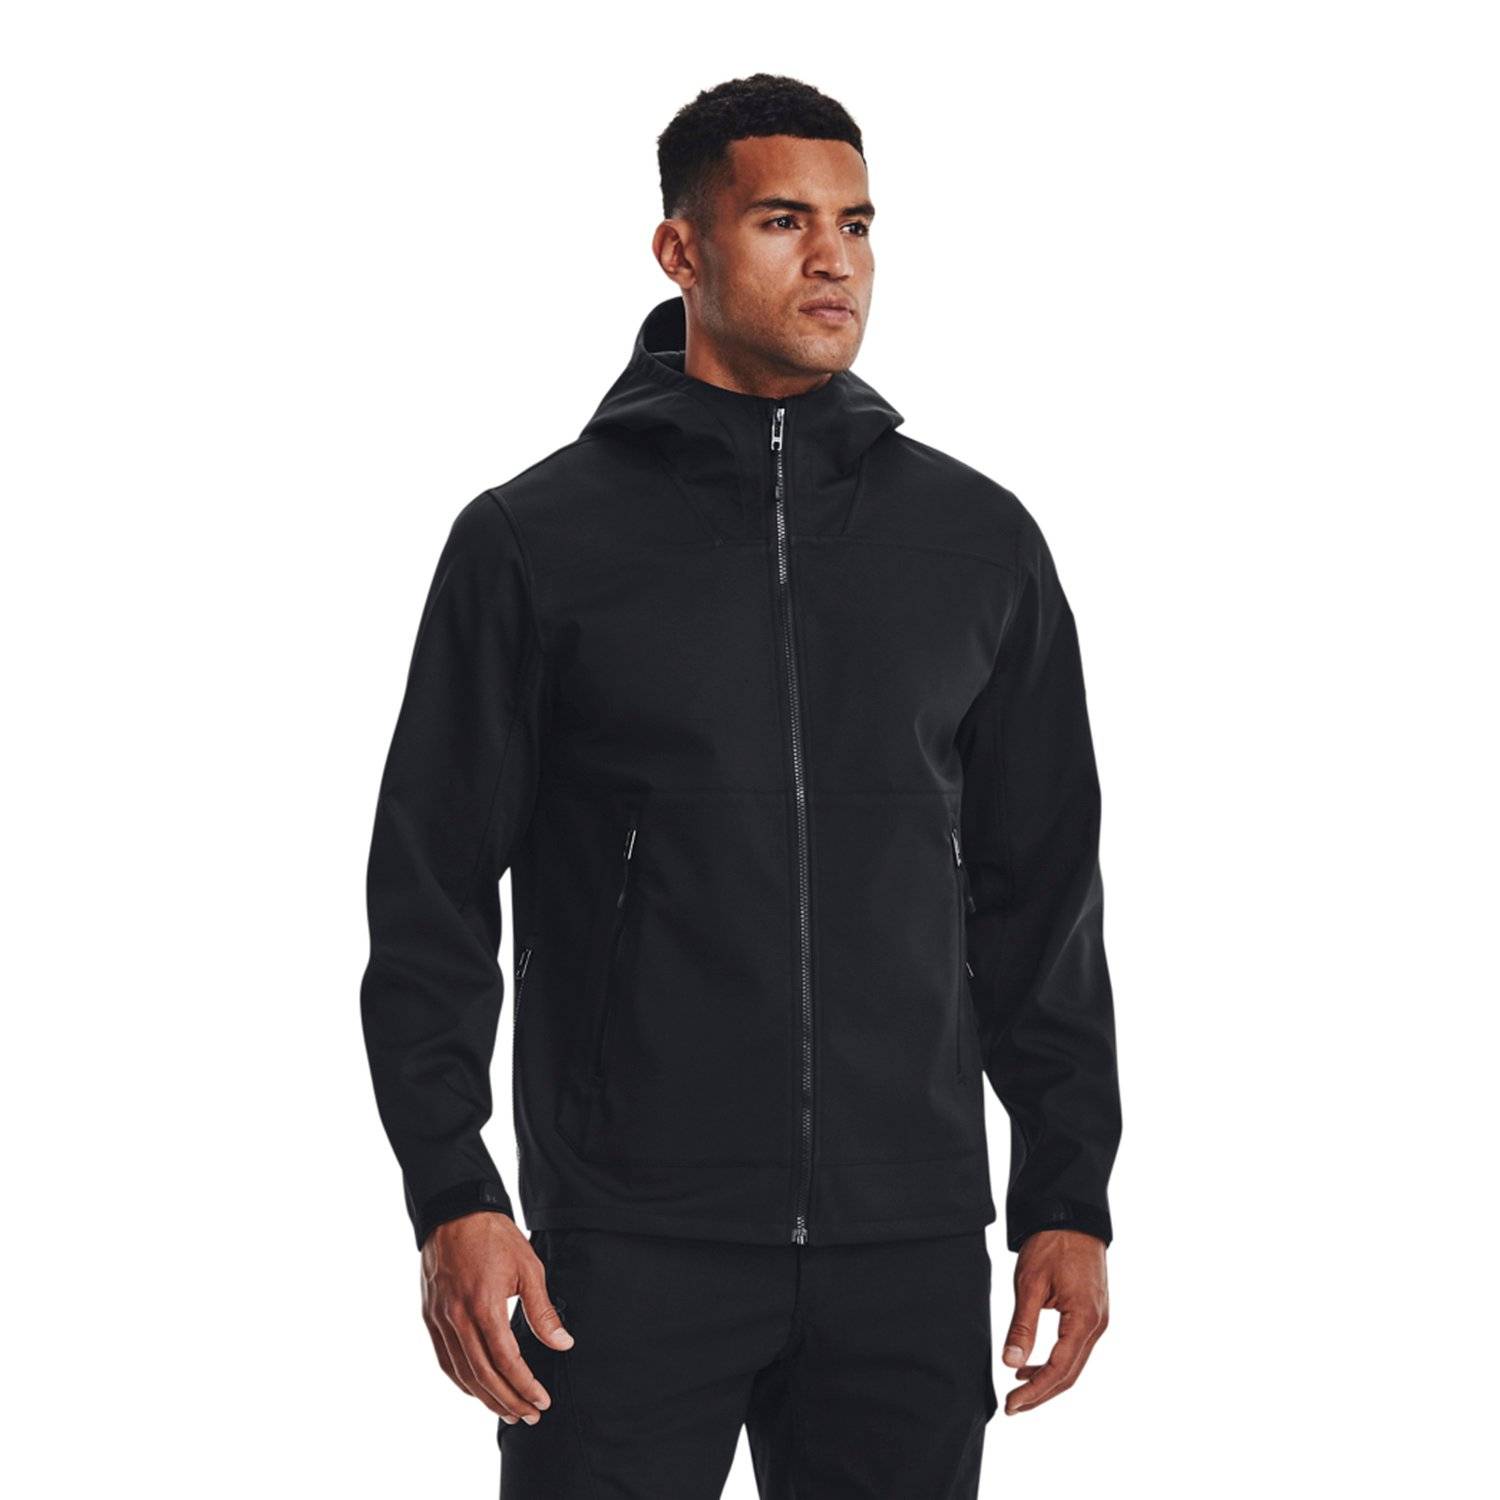 Under Armour Men's Tactical Softshell Jacket